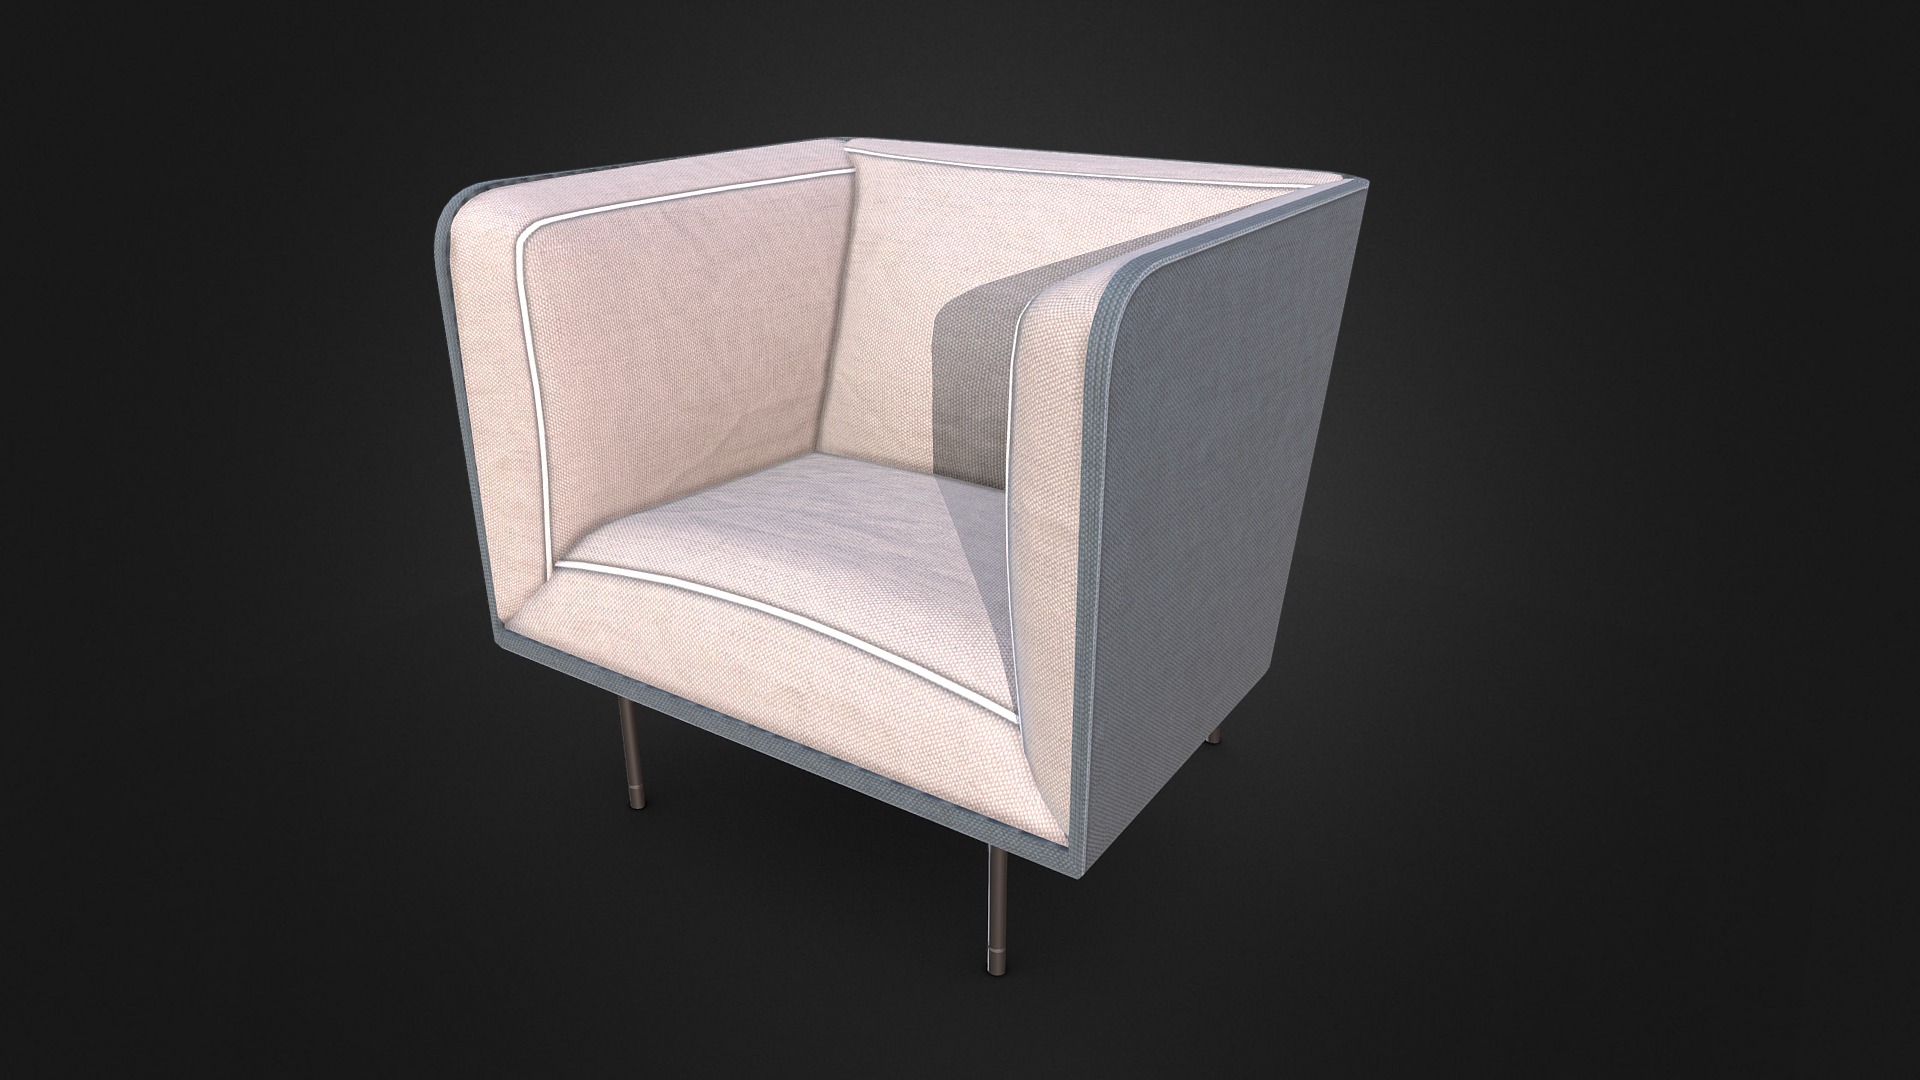 3D model Minimal Modern Arm Chair 01 - This is a 3D model of the Minimal Modern Arm Chair 01. The 3D model is about a white and grey chair.